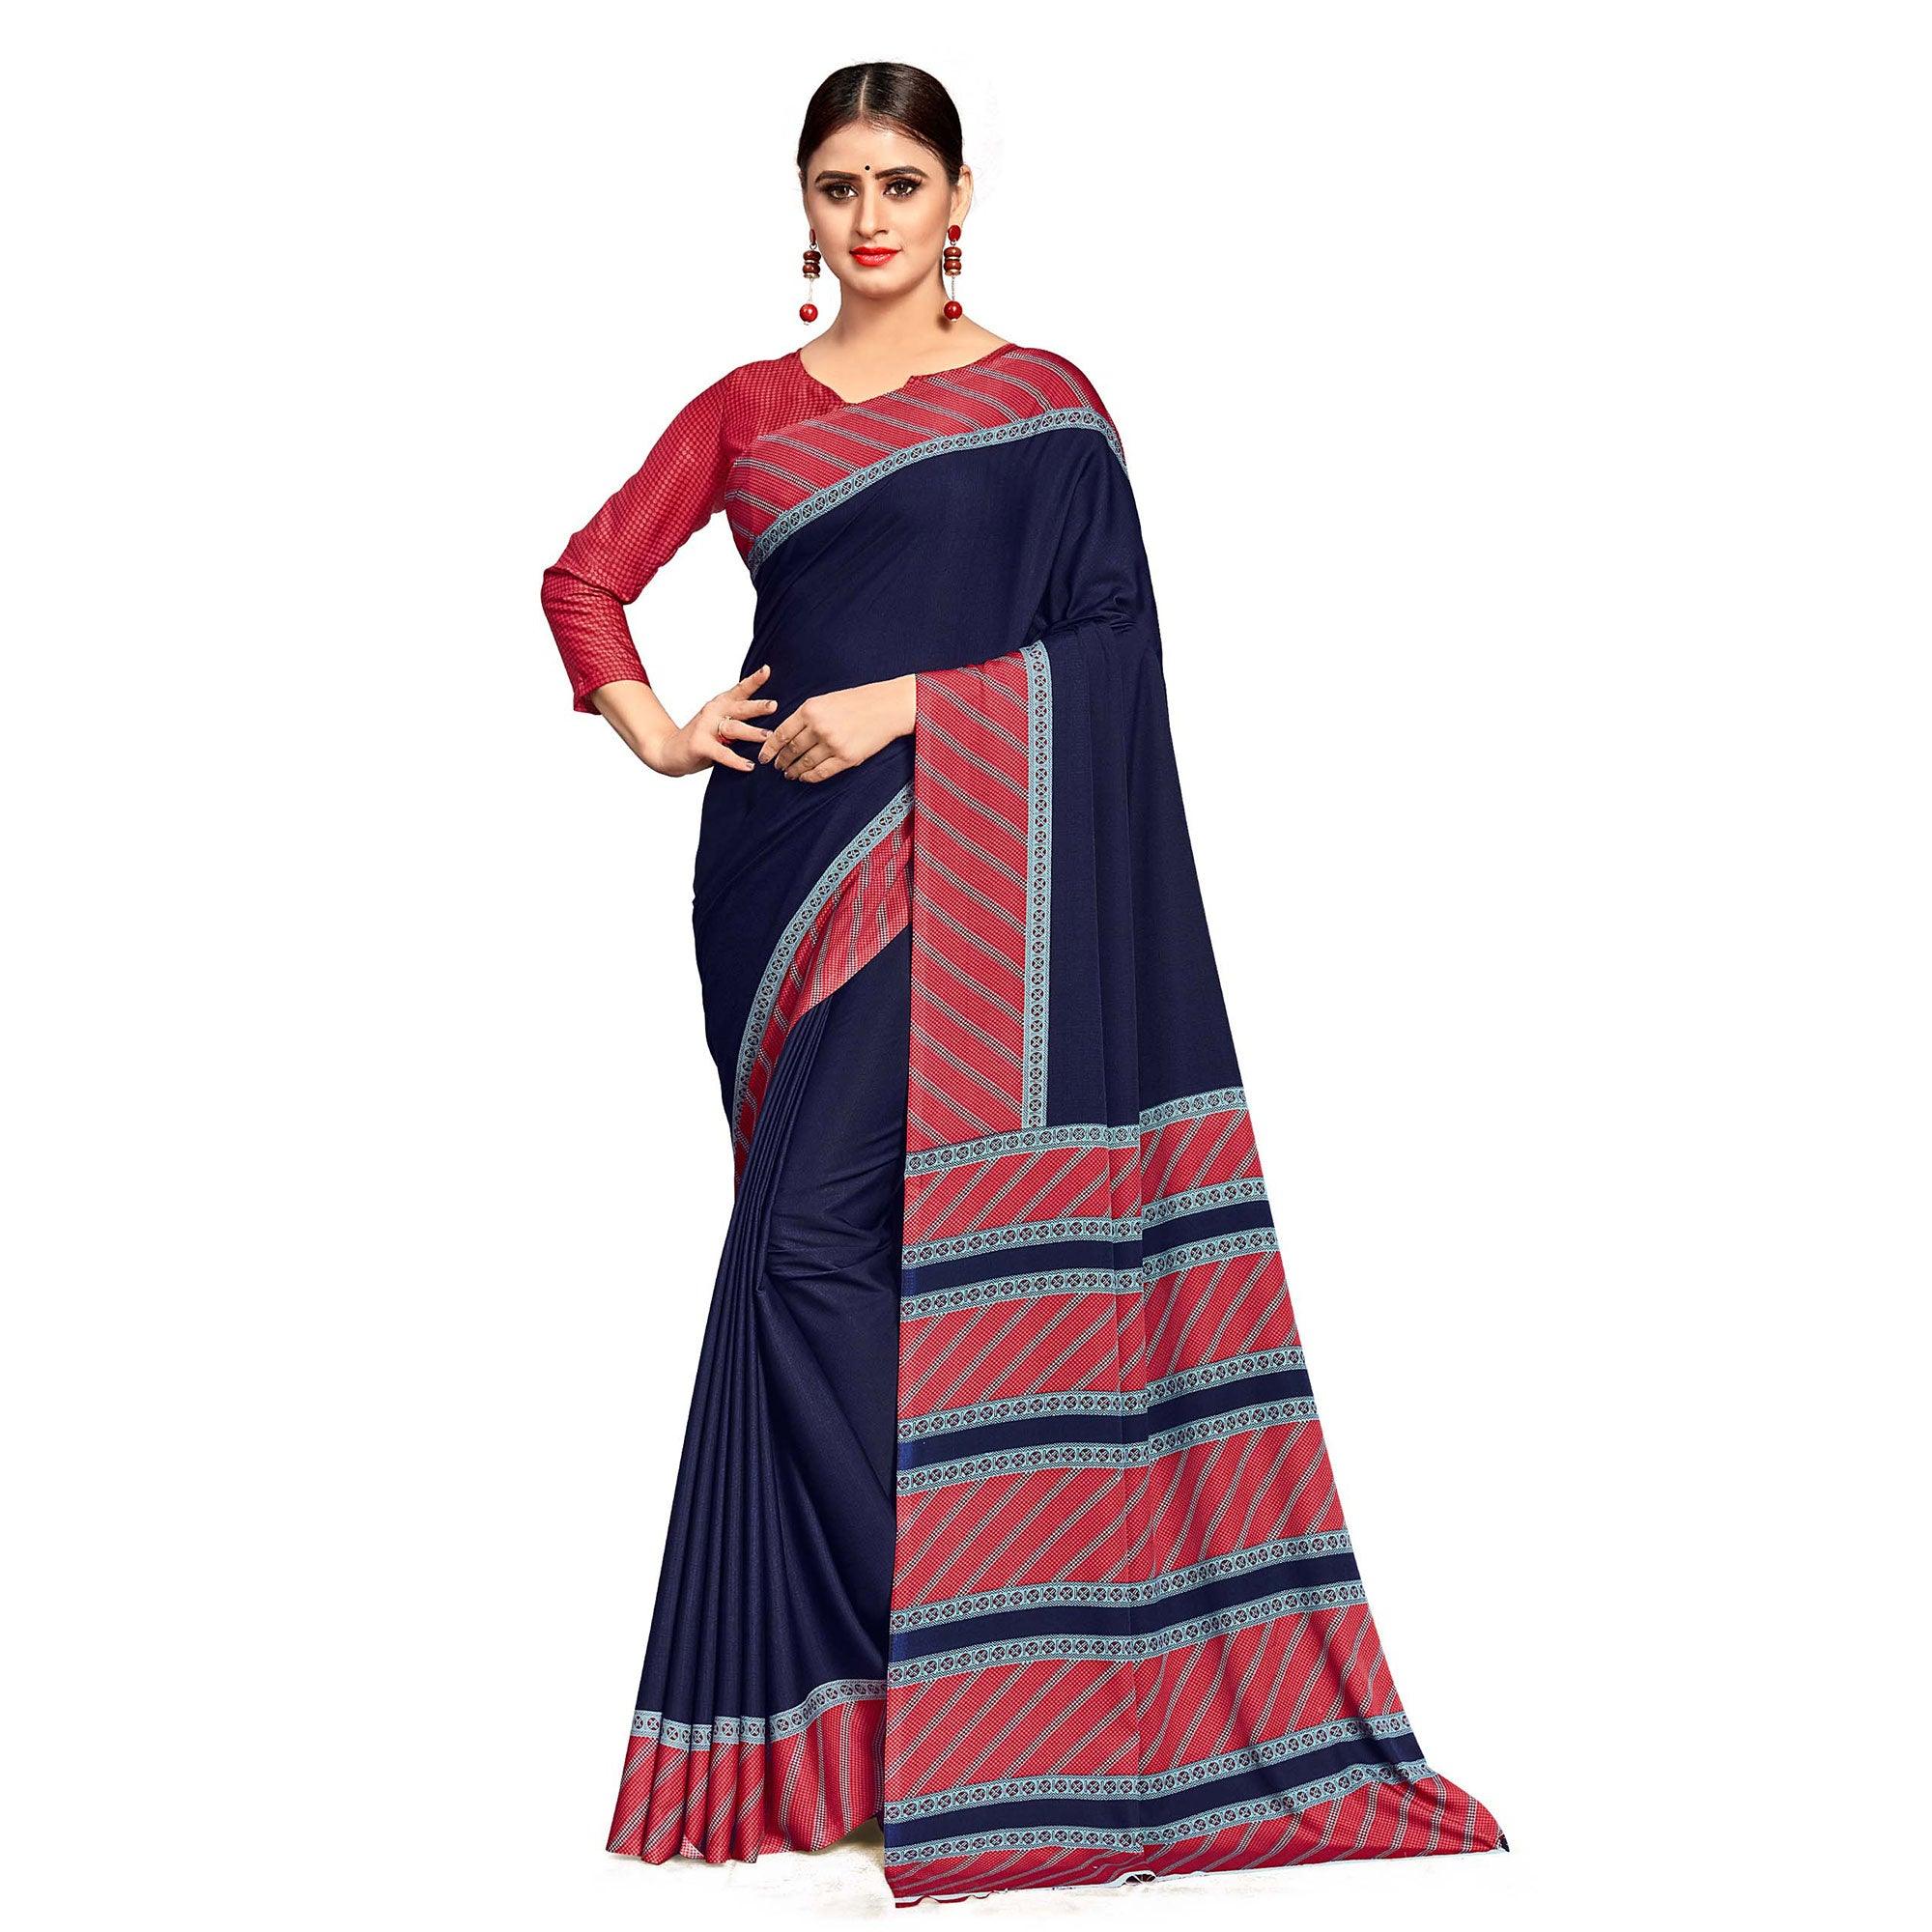 Radiant Navy Blue Colored Casual Wear Printed Crepe Saree - Peachmode